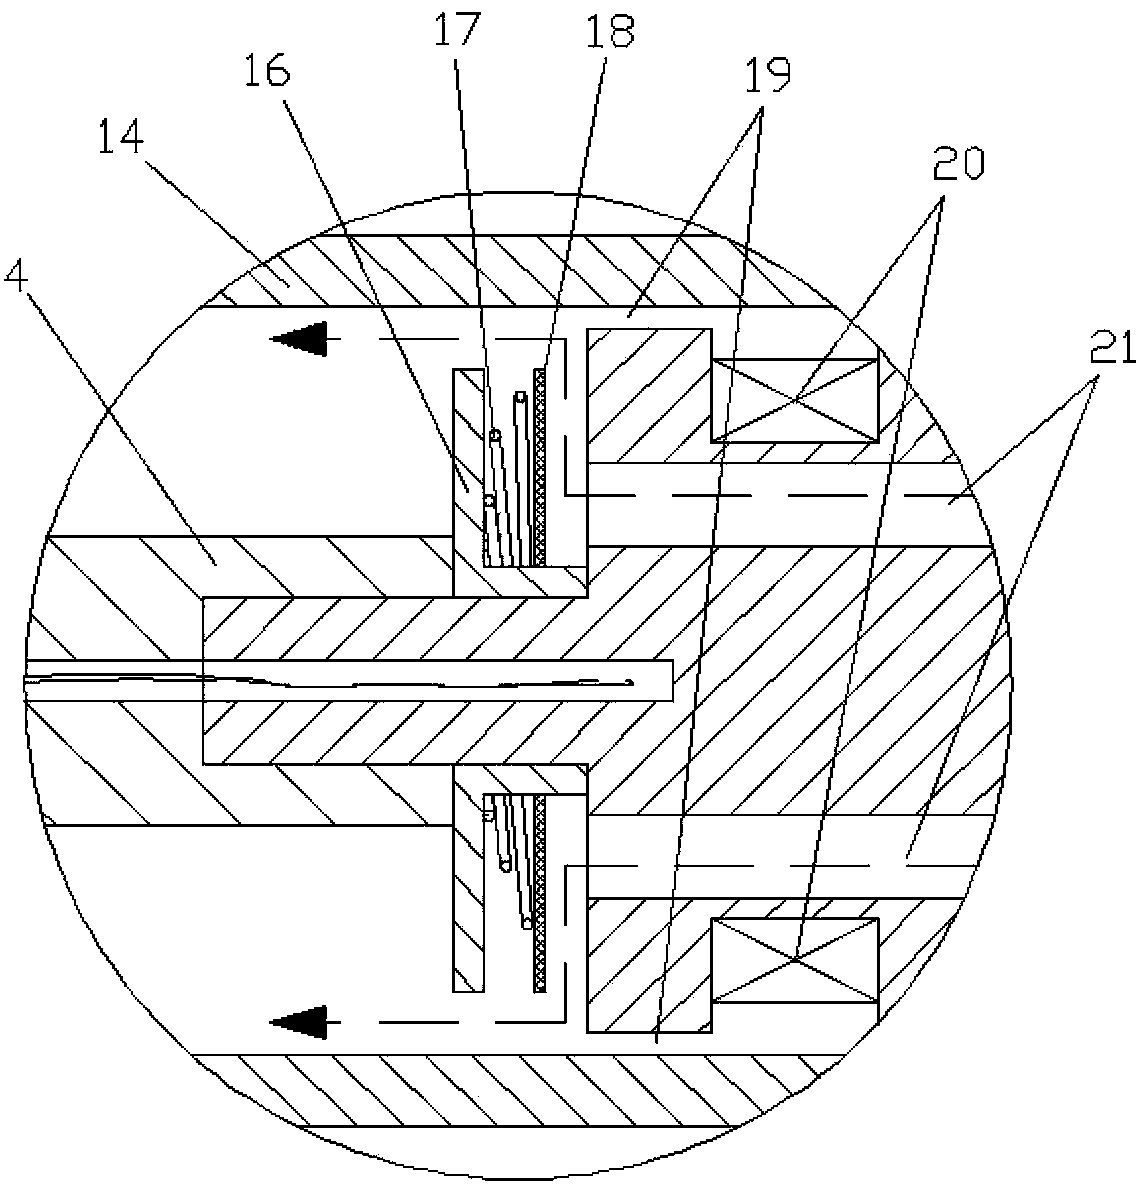 Magneto-rheological damper with asymmetrical controllable damping characteristic